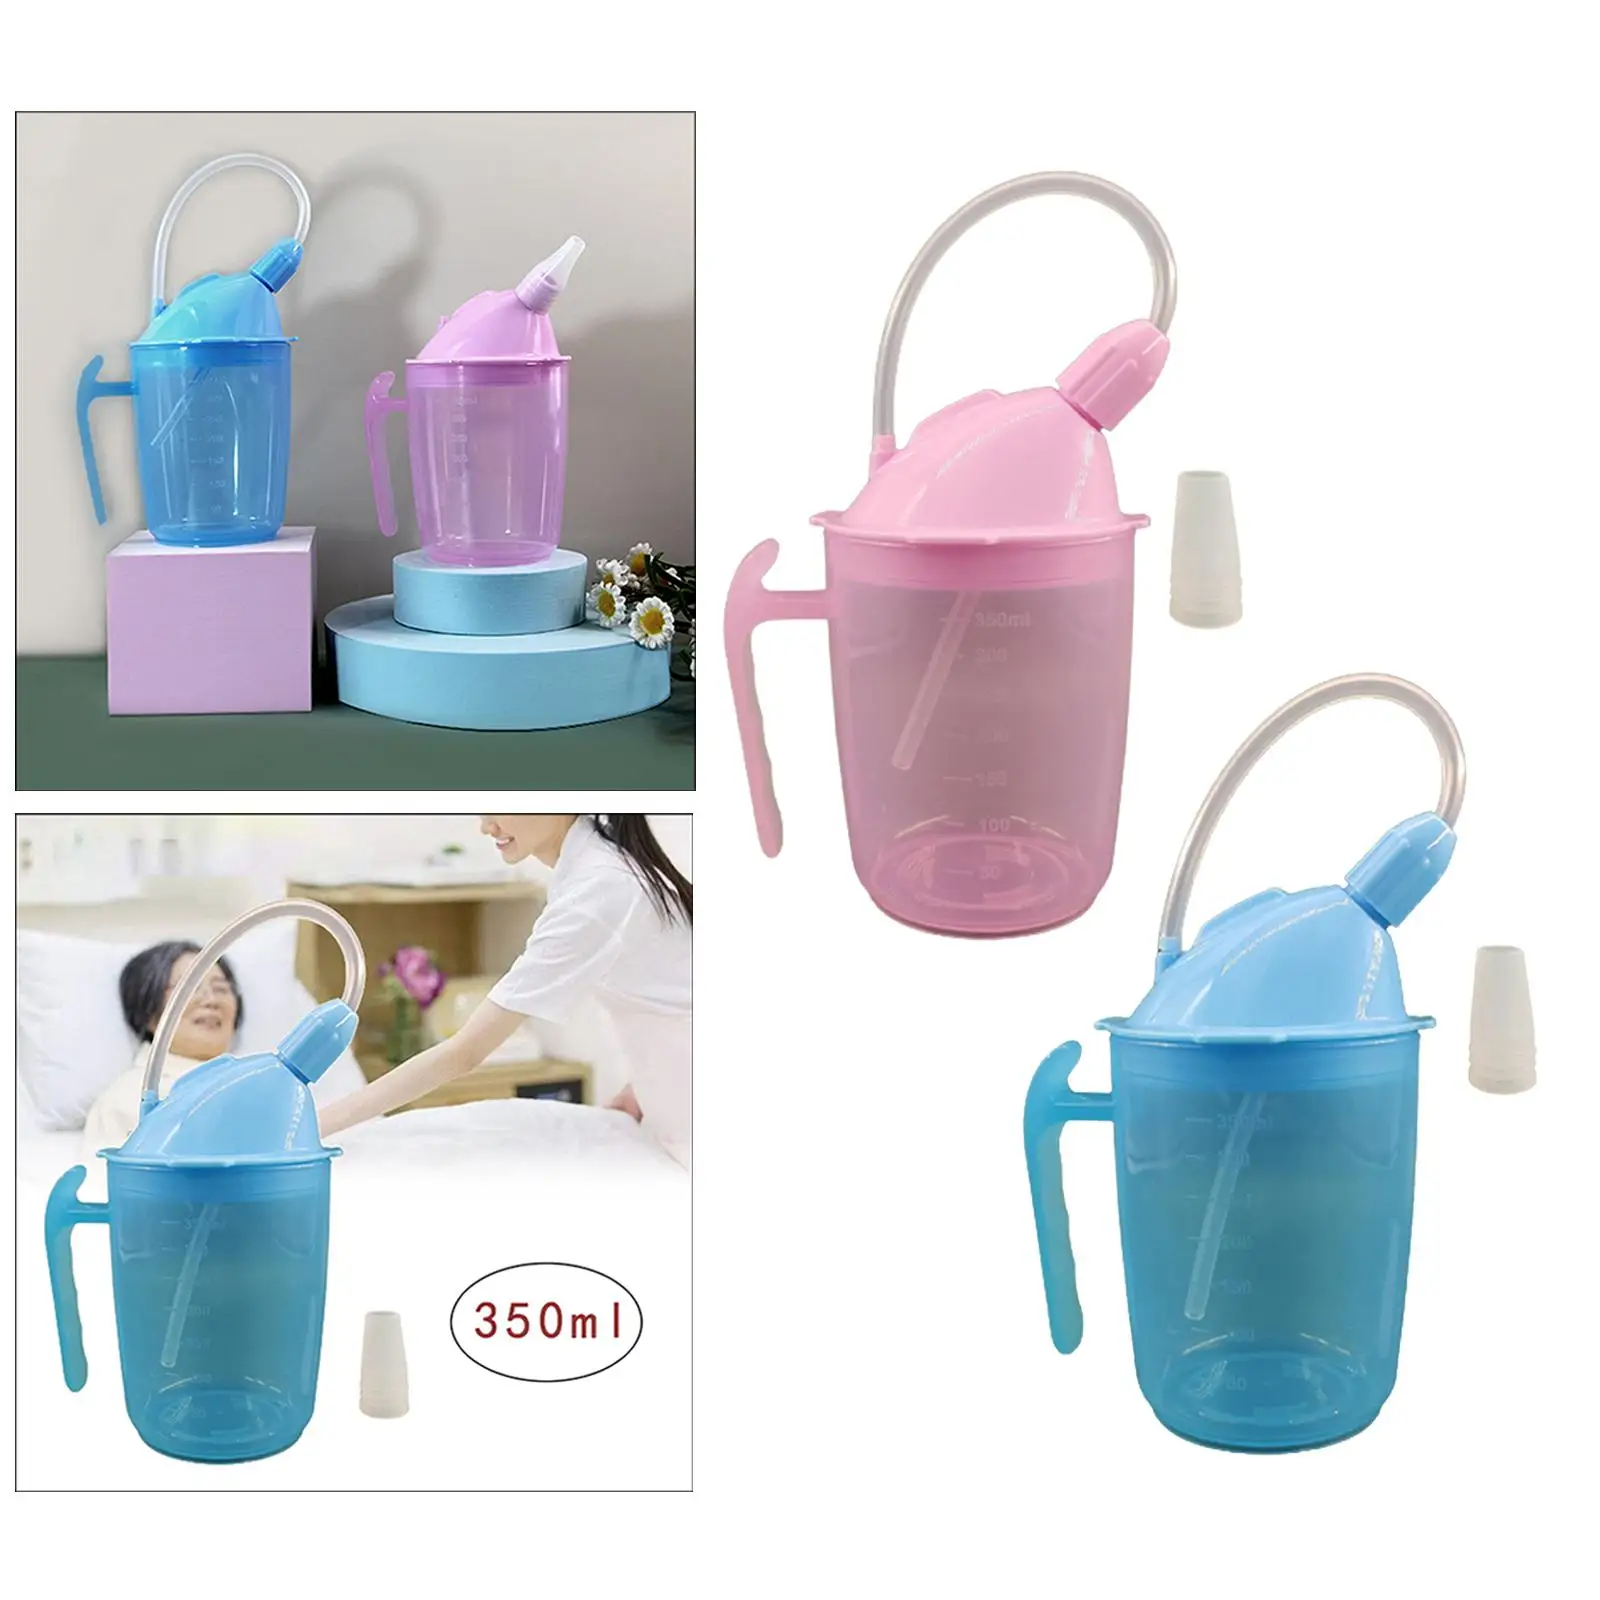 Elderly Nursing Cup, Drinking Cup with Straw for Disabled Patient Maternity Drink Water Porridge Soup, Drinking Aids